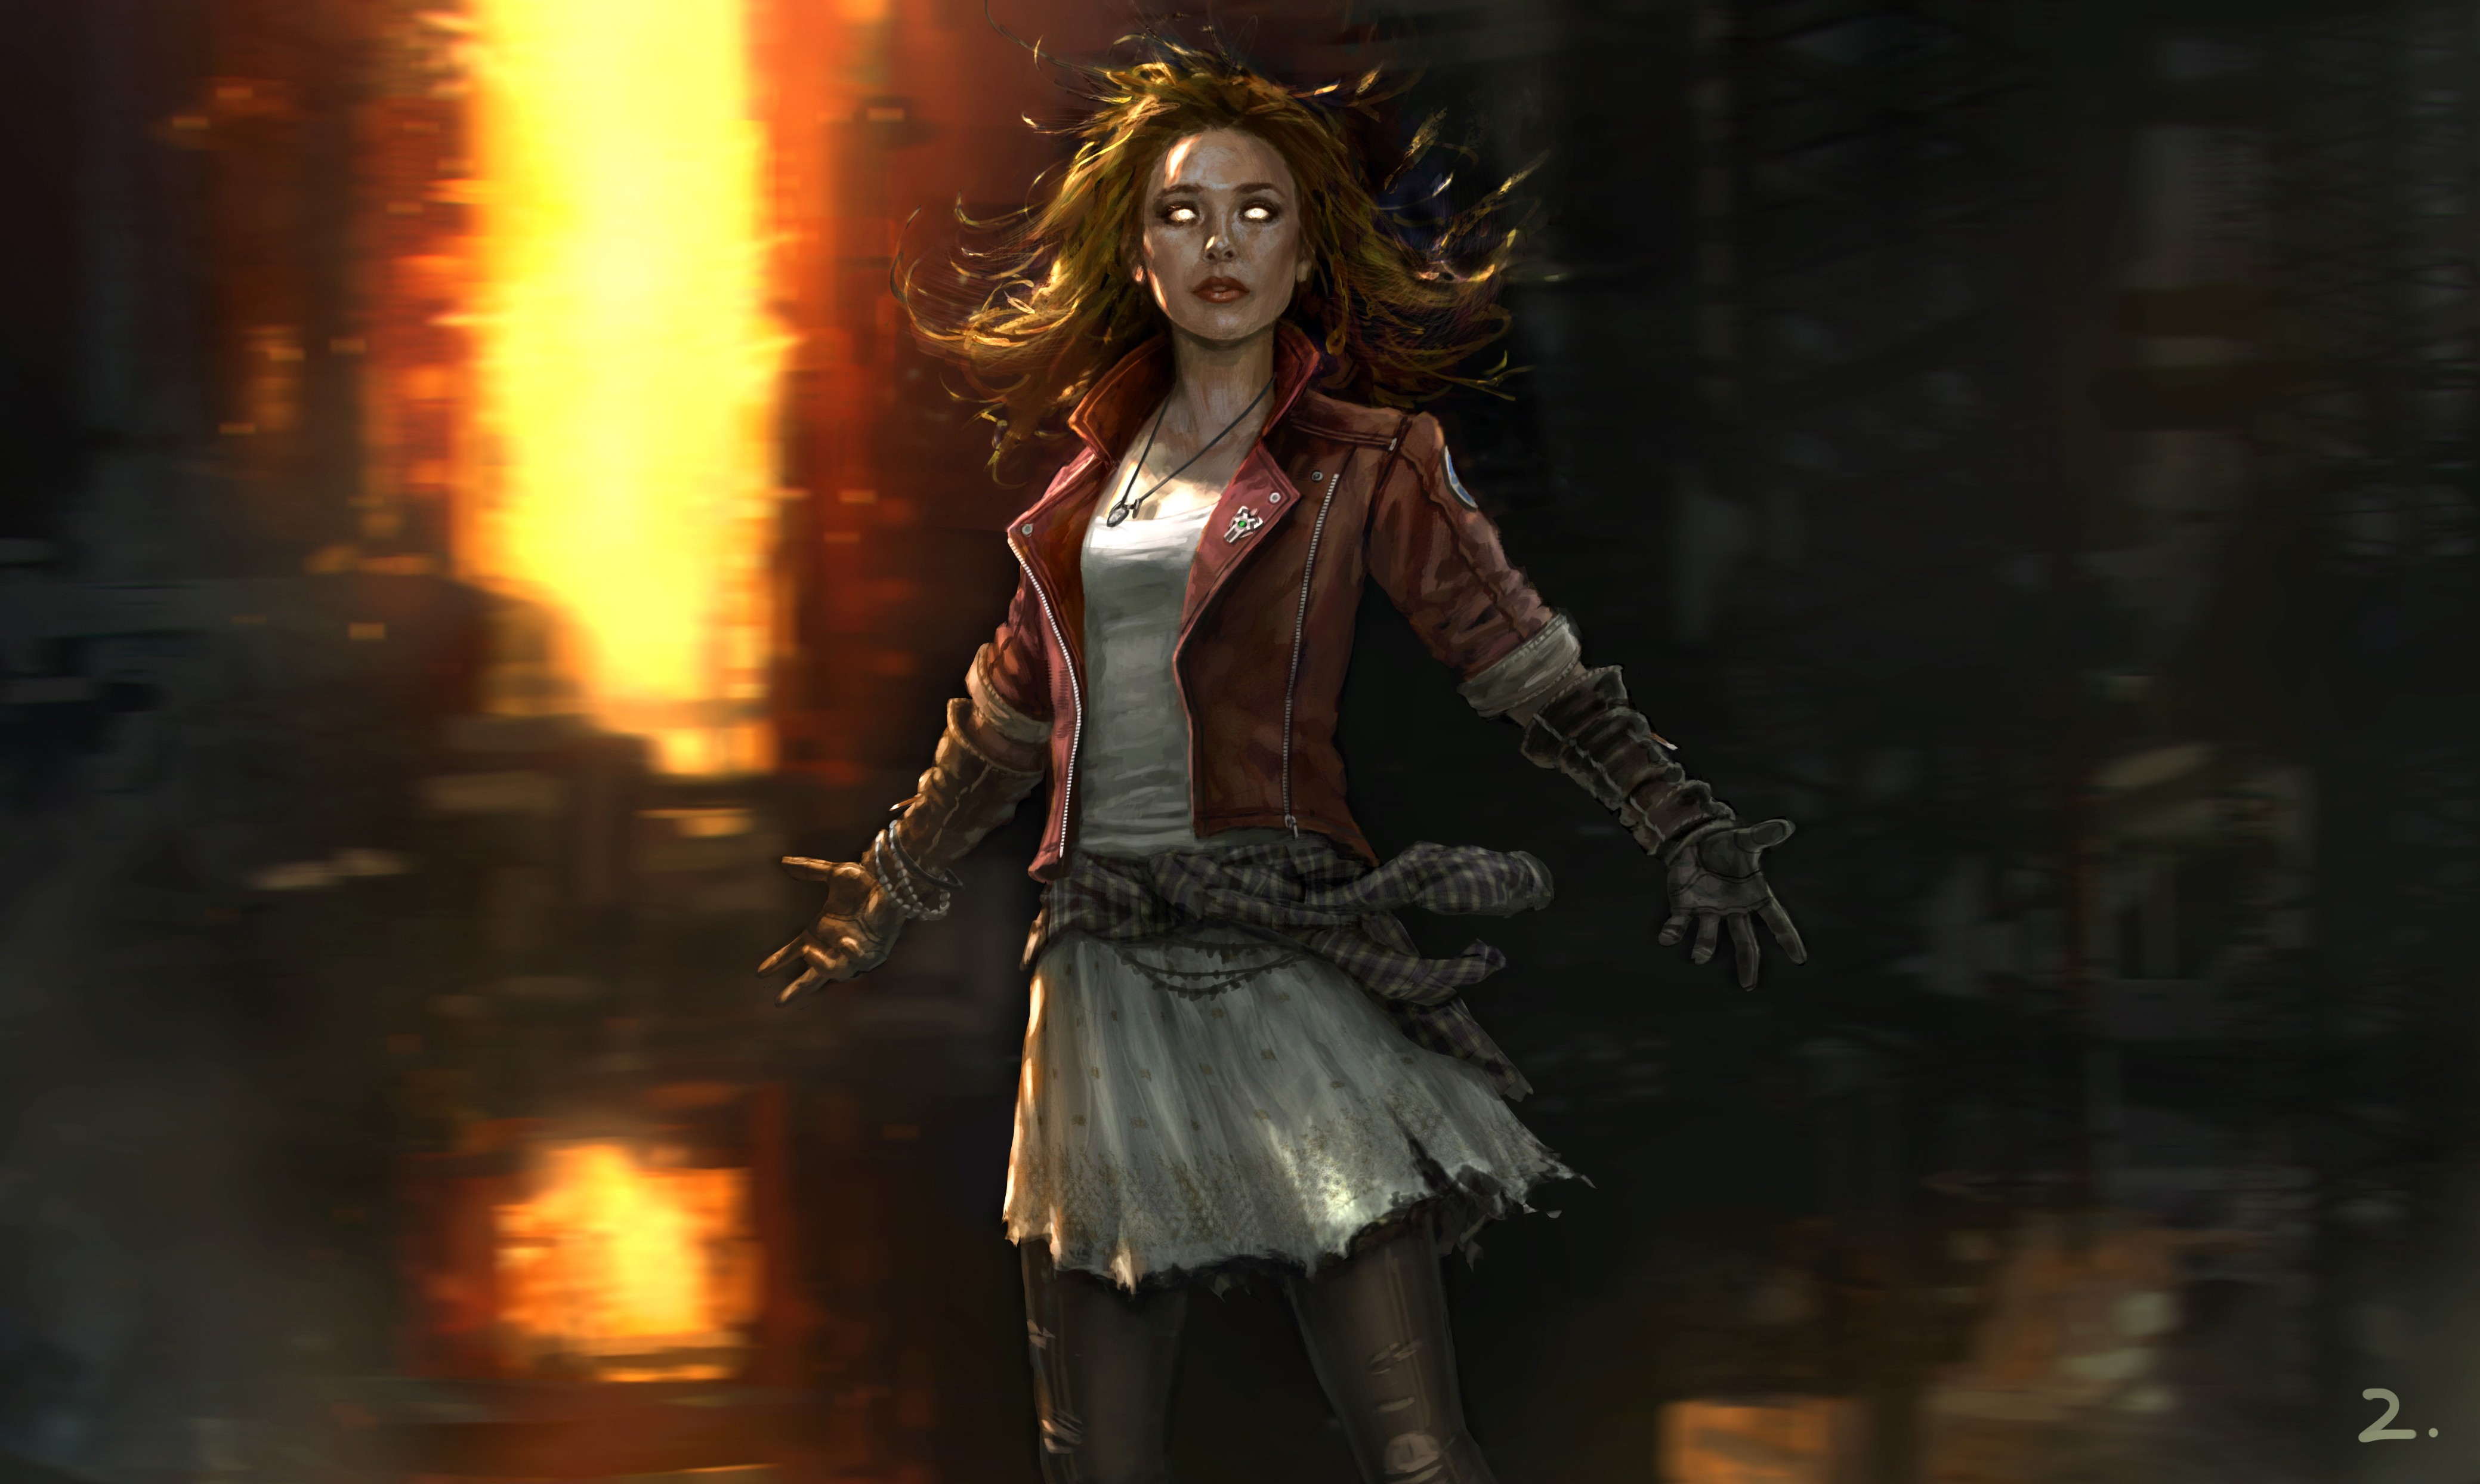 wanda maximoff, scarlet witch, avengers, movie, avengers: age of ultron, the avengers lock screen backgrounds